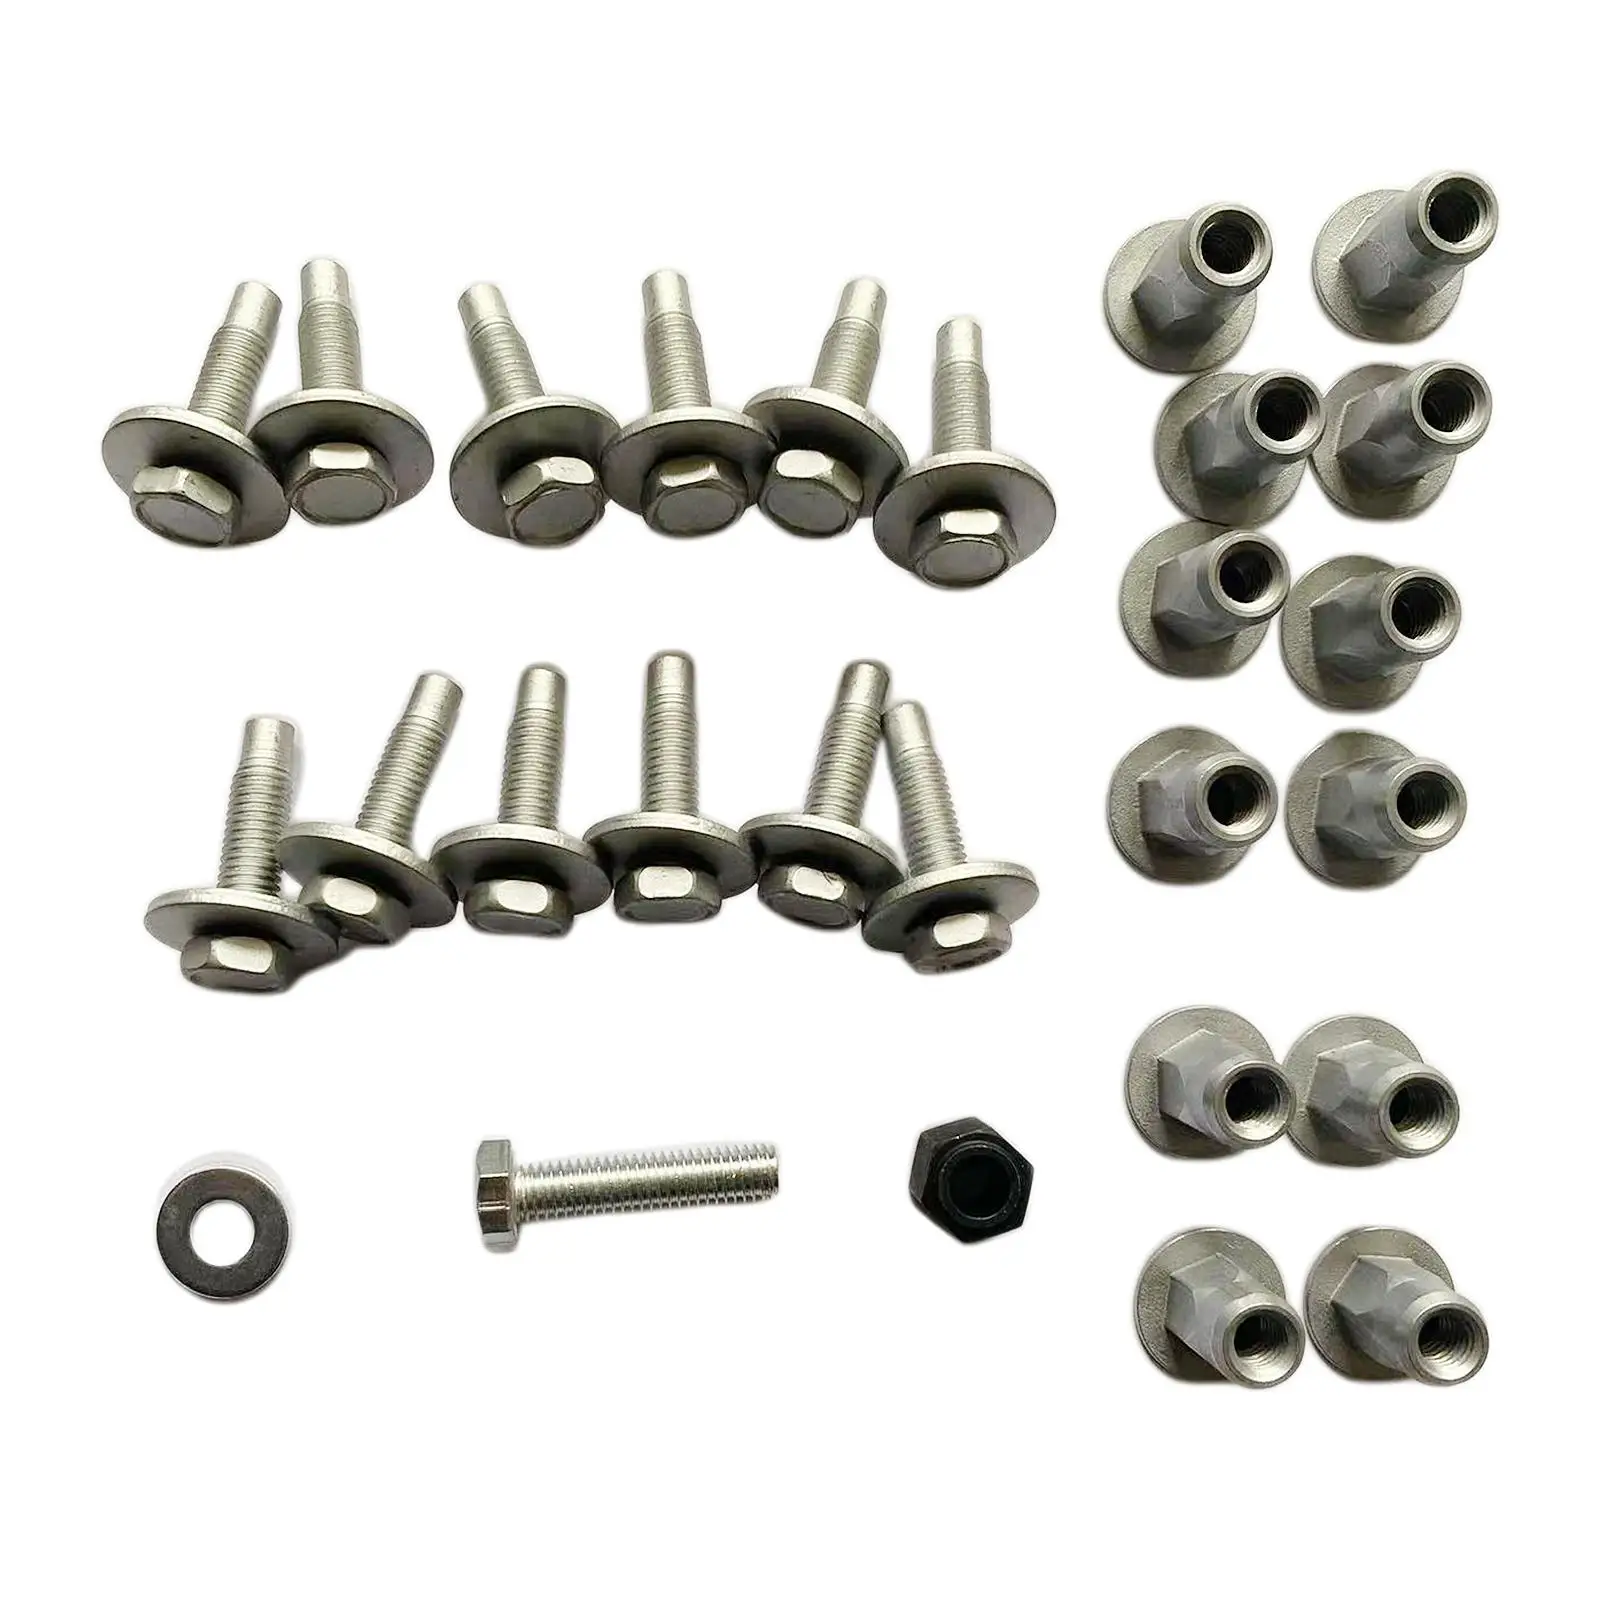 27 Pieces Car Sidestep Mounting Kit Professional Nuts Bolts Set Automotive for Dodge RAM 1500 2500 3500 Direct Replaces